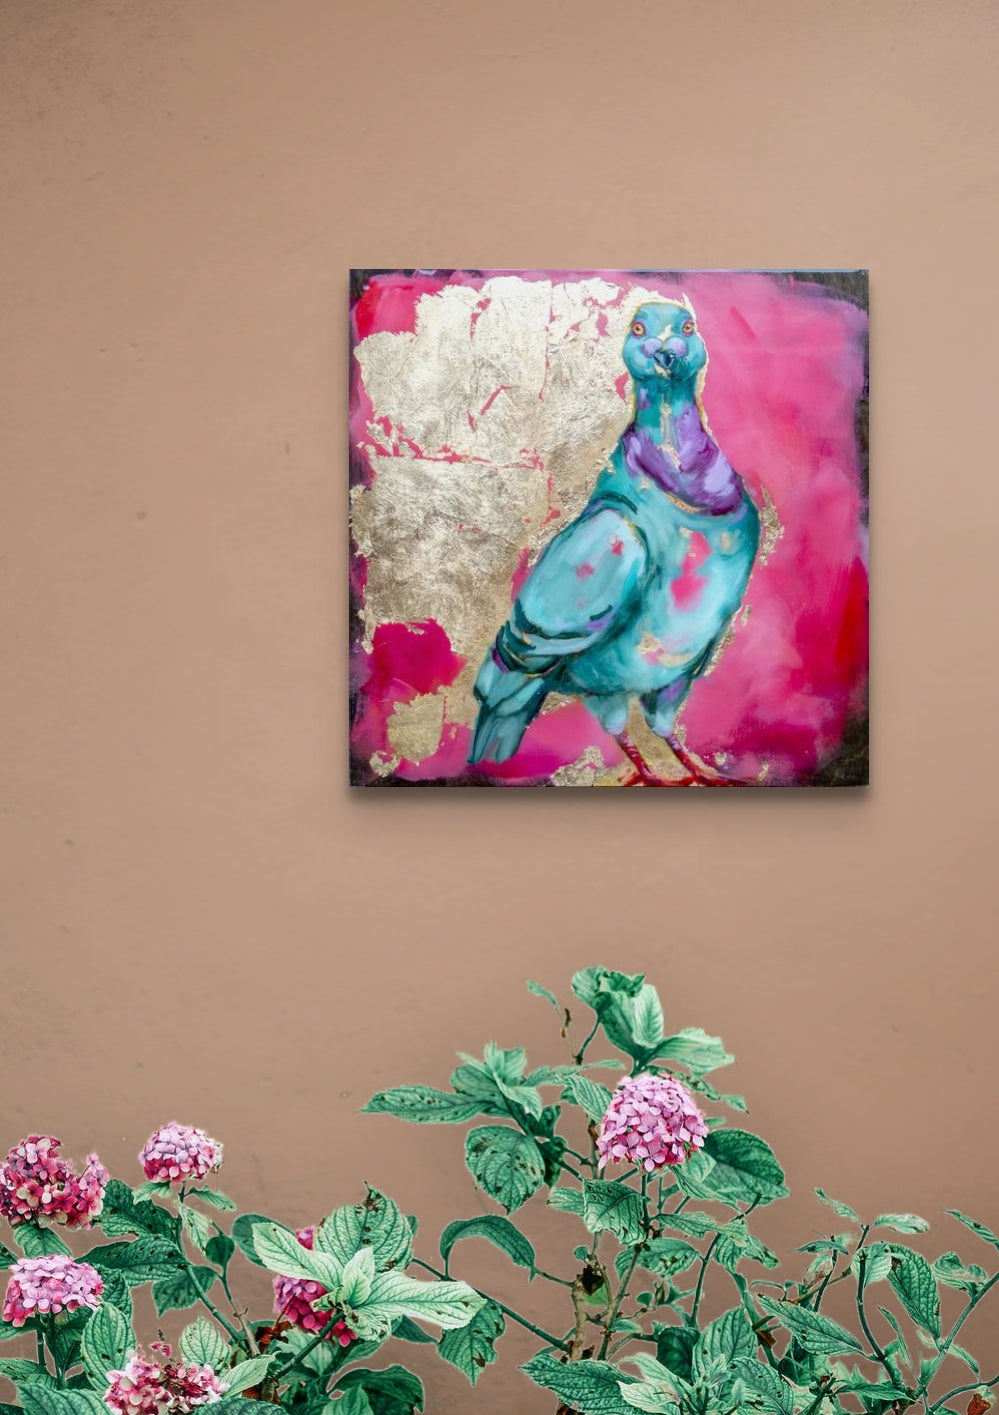 14"x14" painting of Pidgeon using mixed media; acrylic and oil, pencil, and gold leaf with glossy resin finish on surface; artist Shaney Watters; in situ